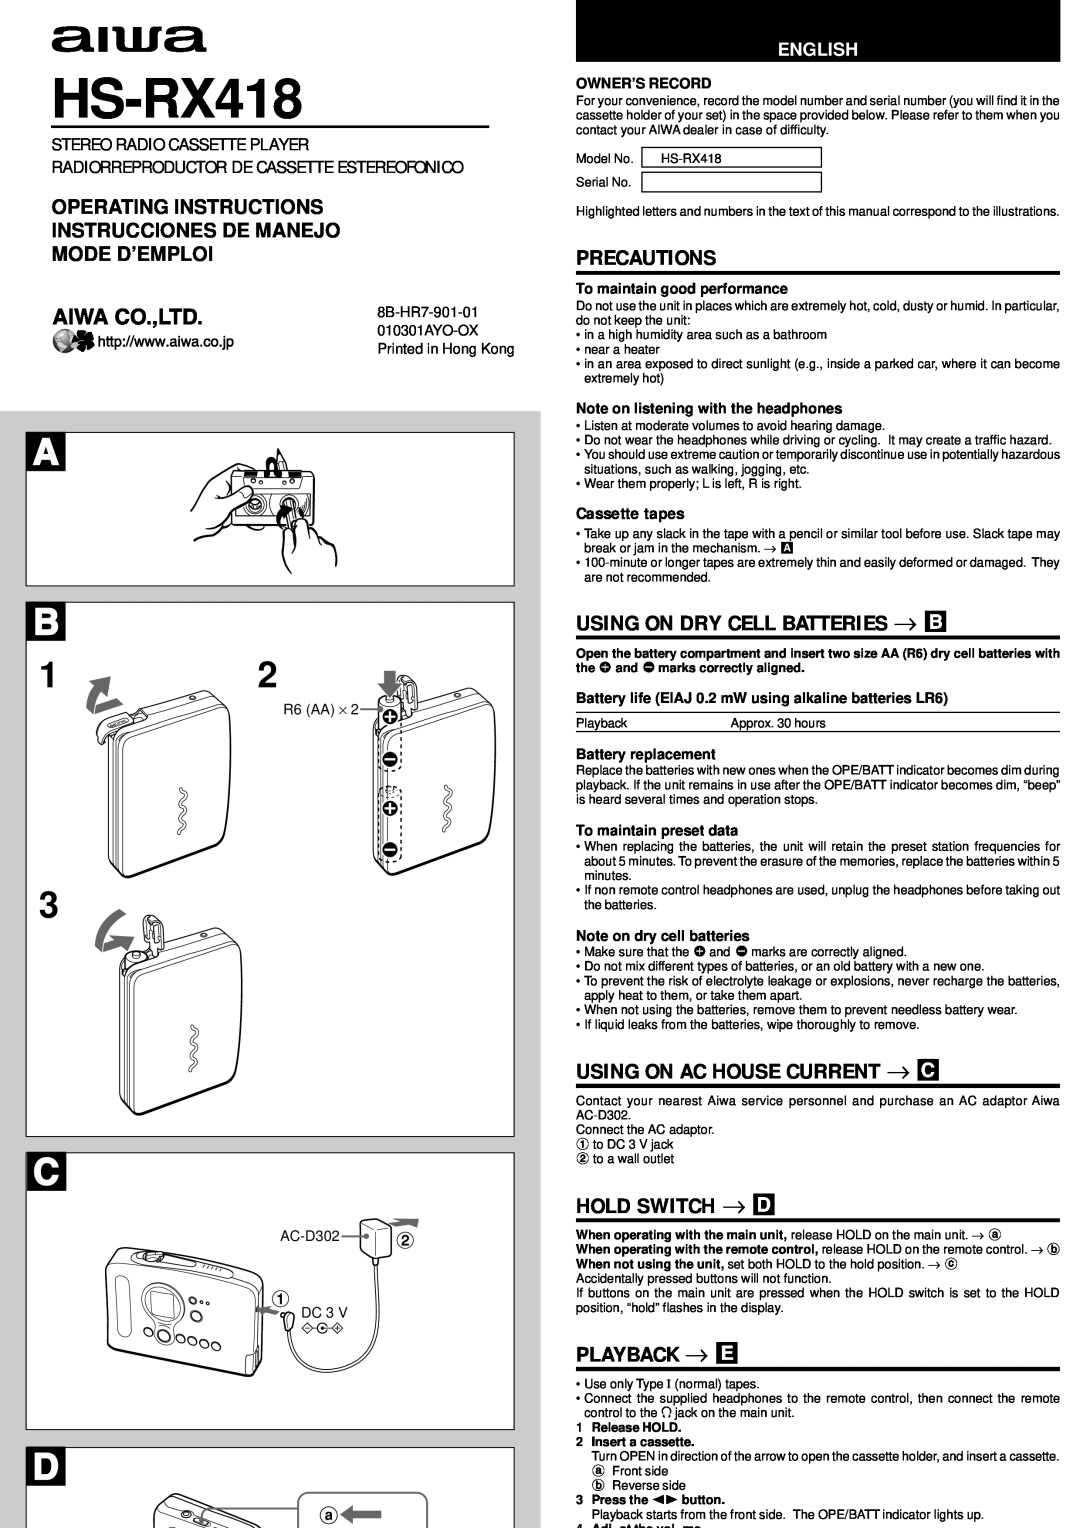 Aiwa HS-RX418 operating instructions Precautions, Using On Dry Cell Batteries → B, Using On Ac House Current → C, English 